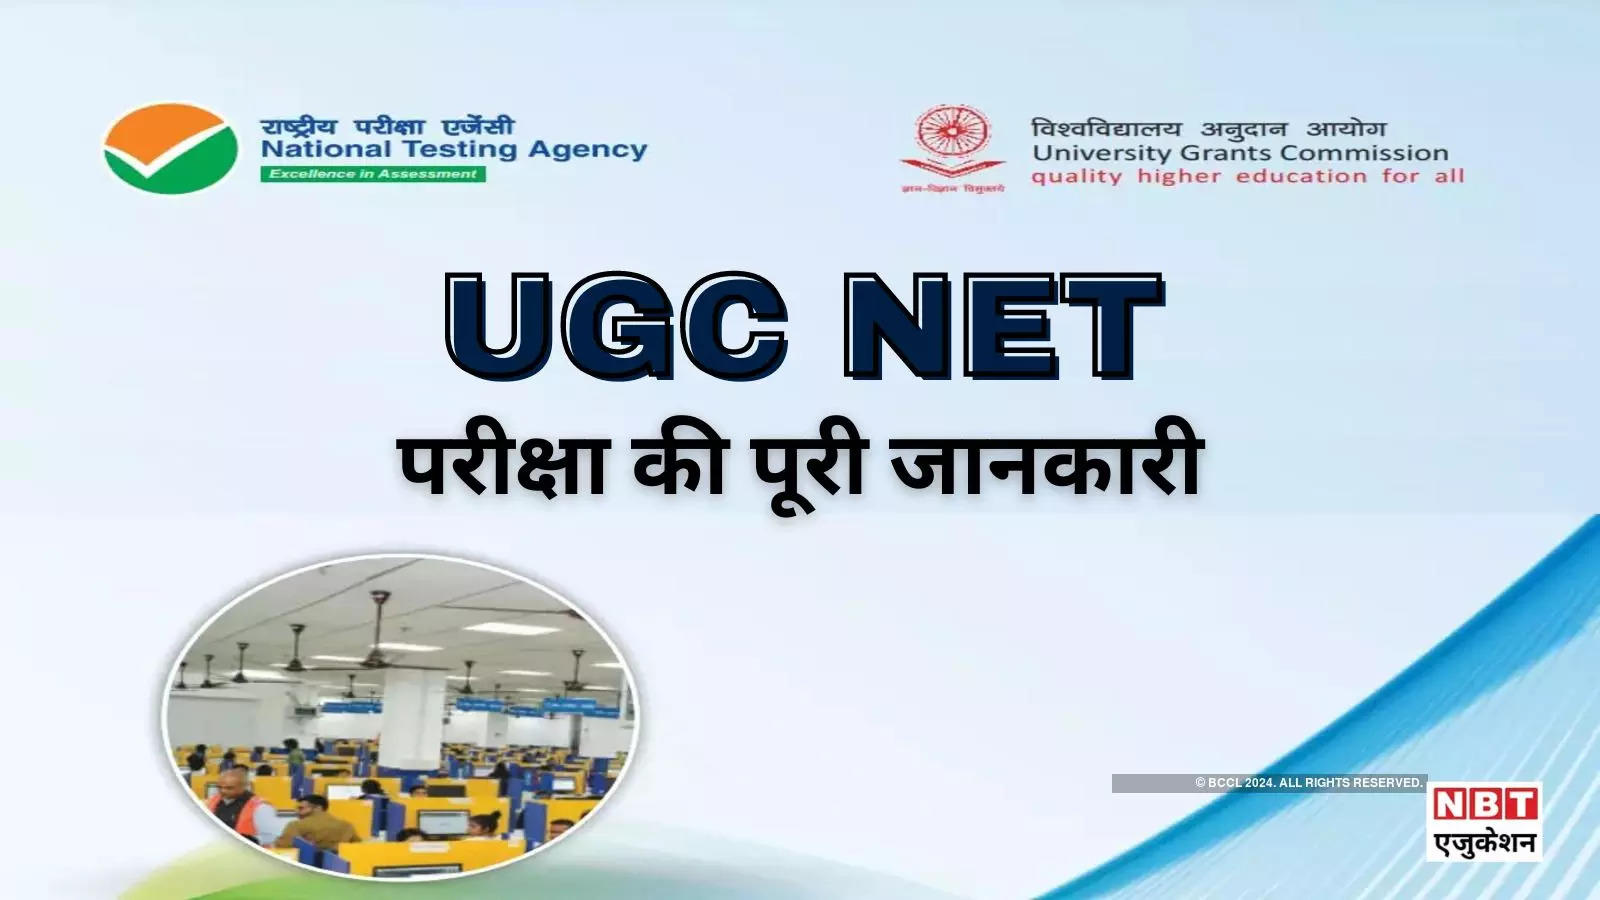 What is UGC NET, why and for whom is this exam conducted? Who can take the NET exam? Know everything